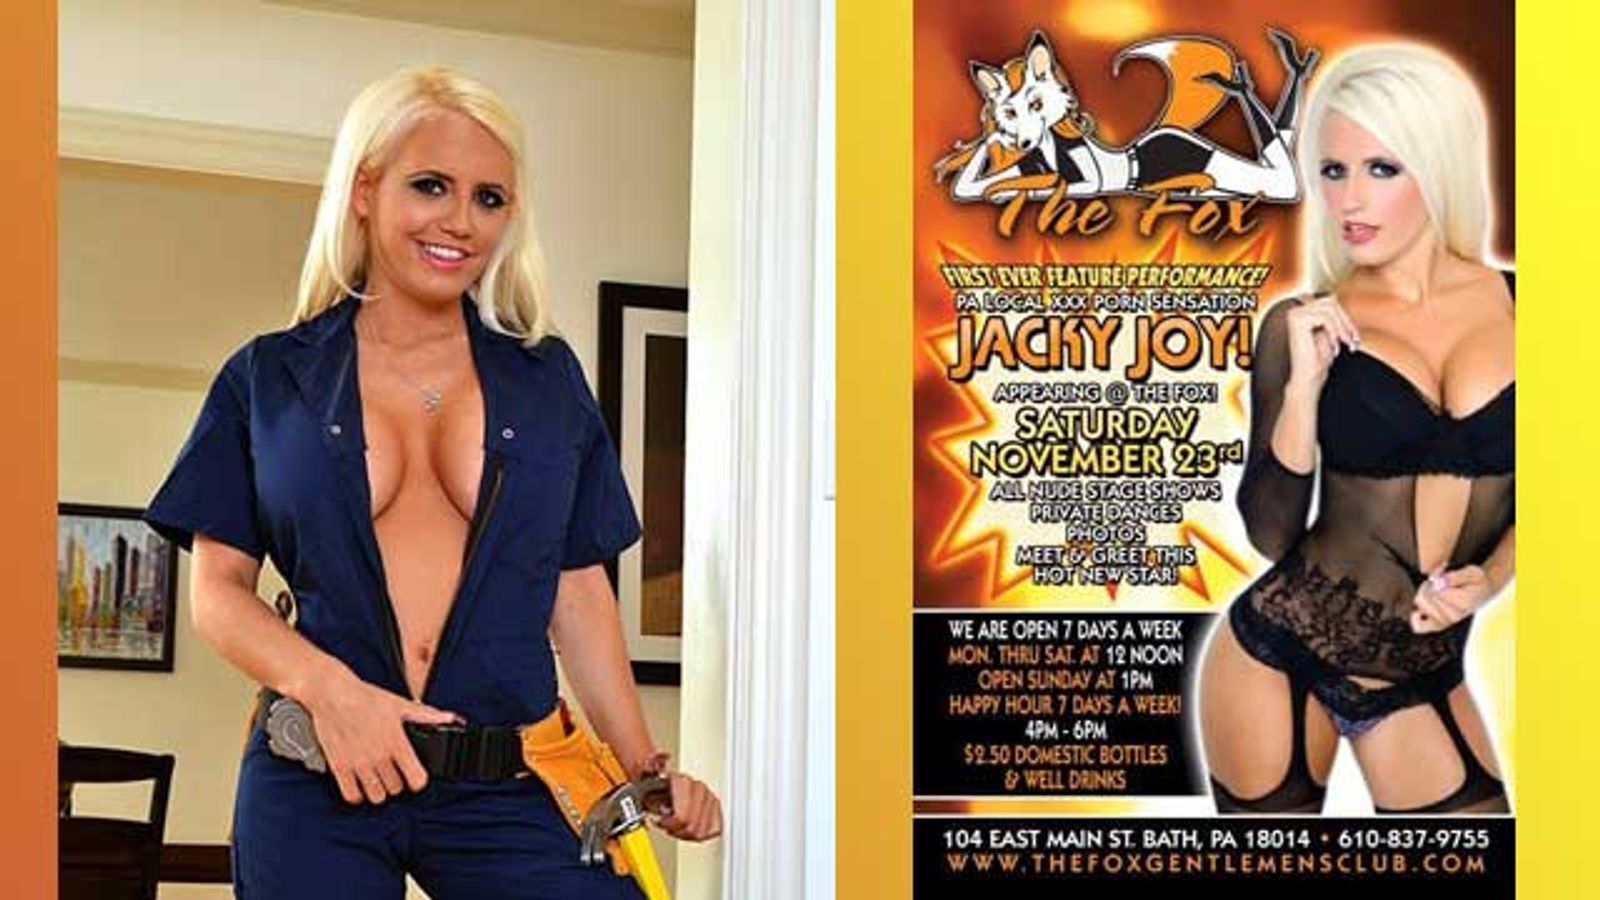 Jacky Joy's First Feature Dance Scheduled for This Saturday